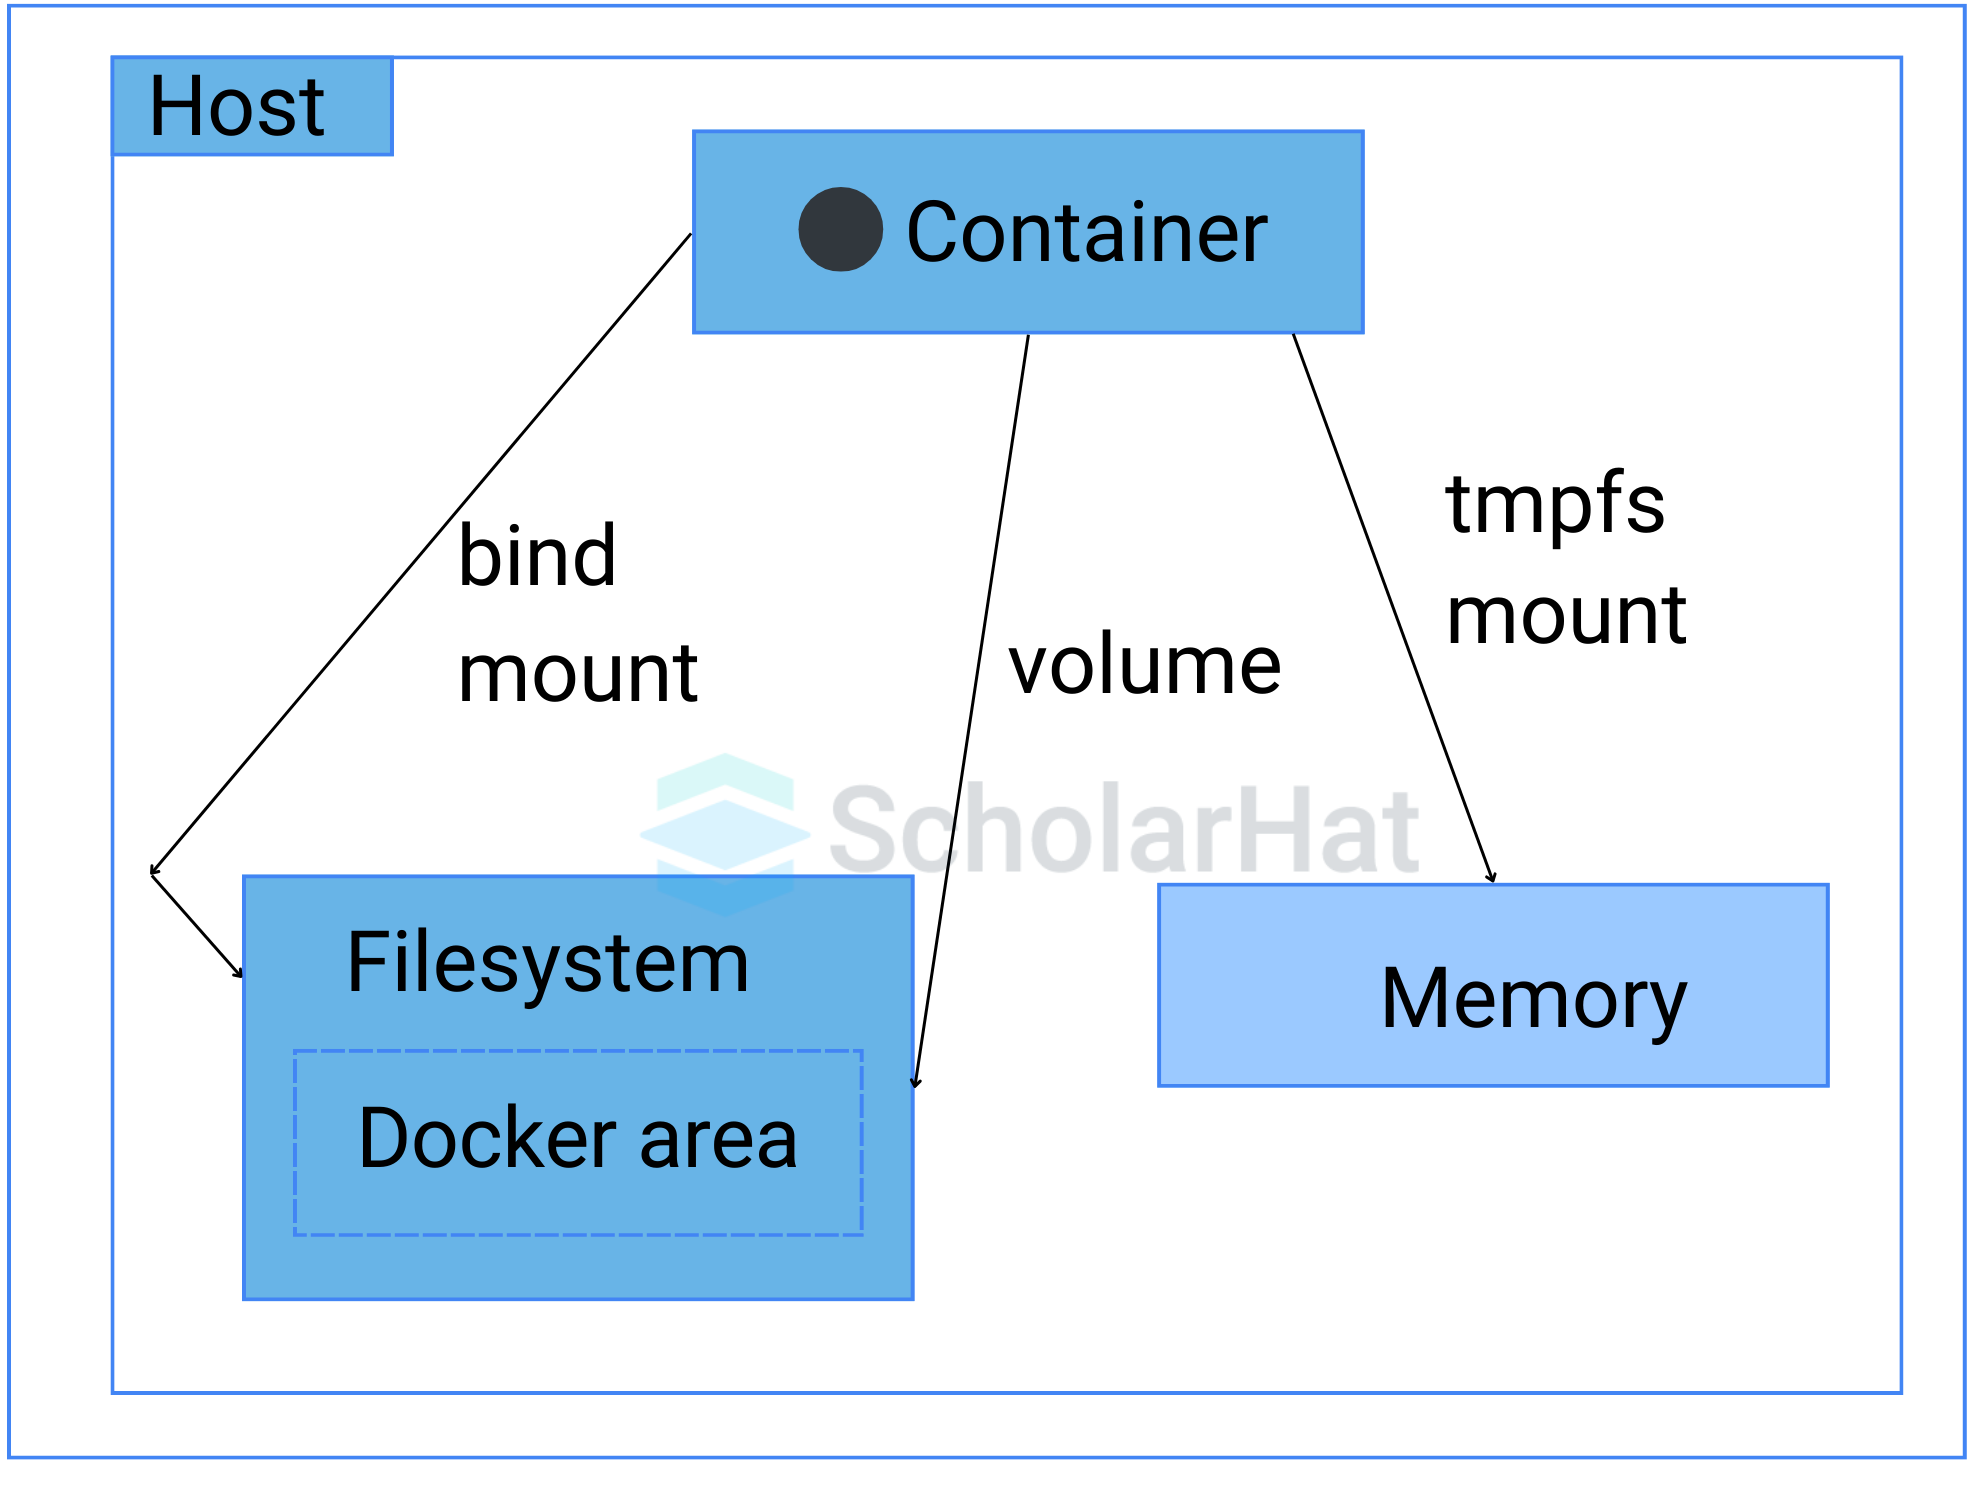 What are the various volume mount types accessible in Docker?